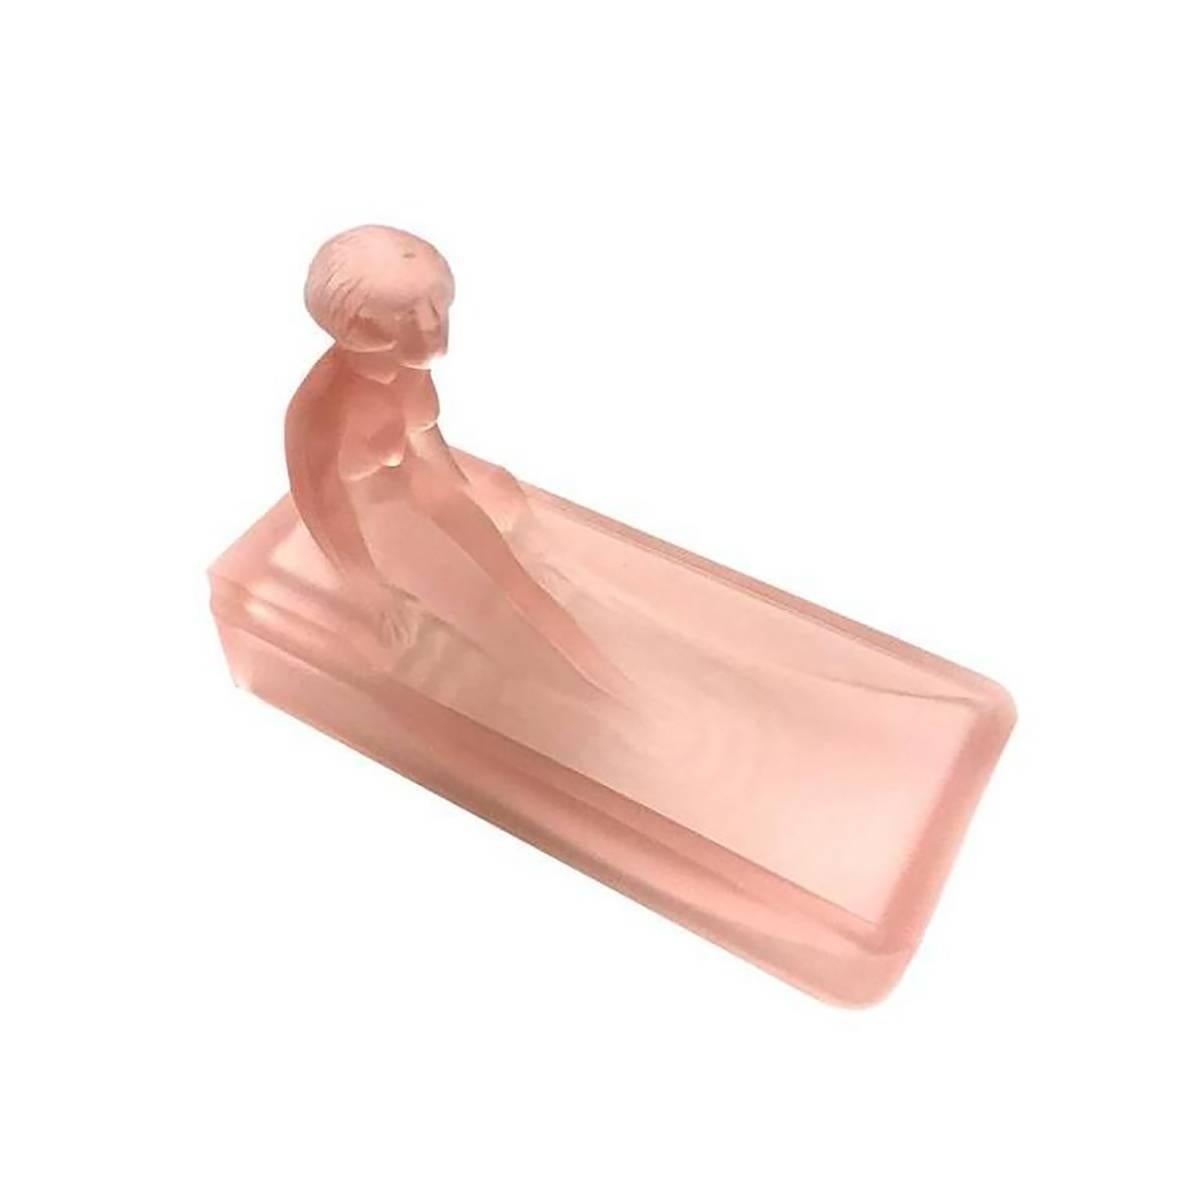 This 1970s re-edition of a 1927 Art Deco Heinrich Hoffman pink art glass soap dish/ring tray features a nude female figure bathing in a tub.

Condition: Excellent.
Specifications: Height 2.75, width 6, depth 4.
Materials /techniques: Glass.

   

